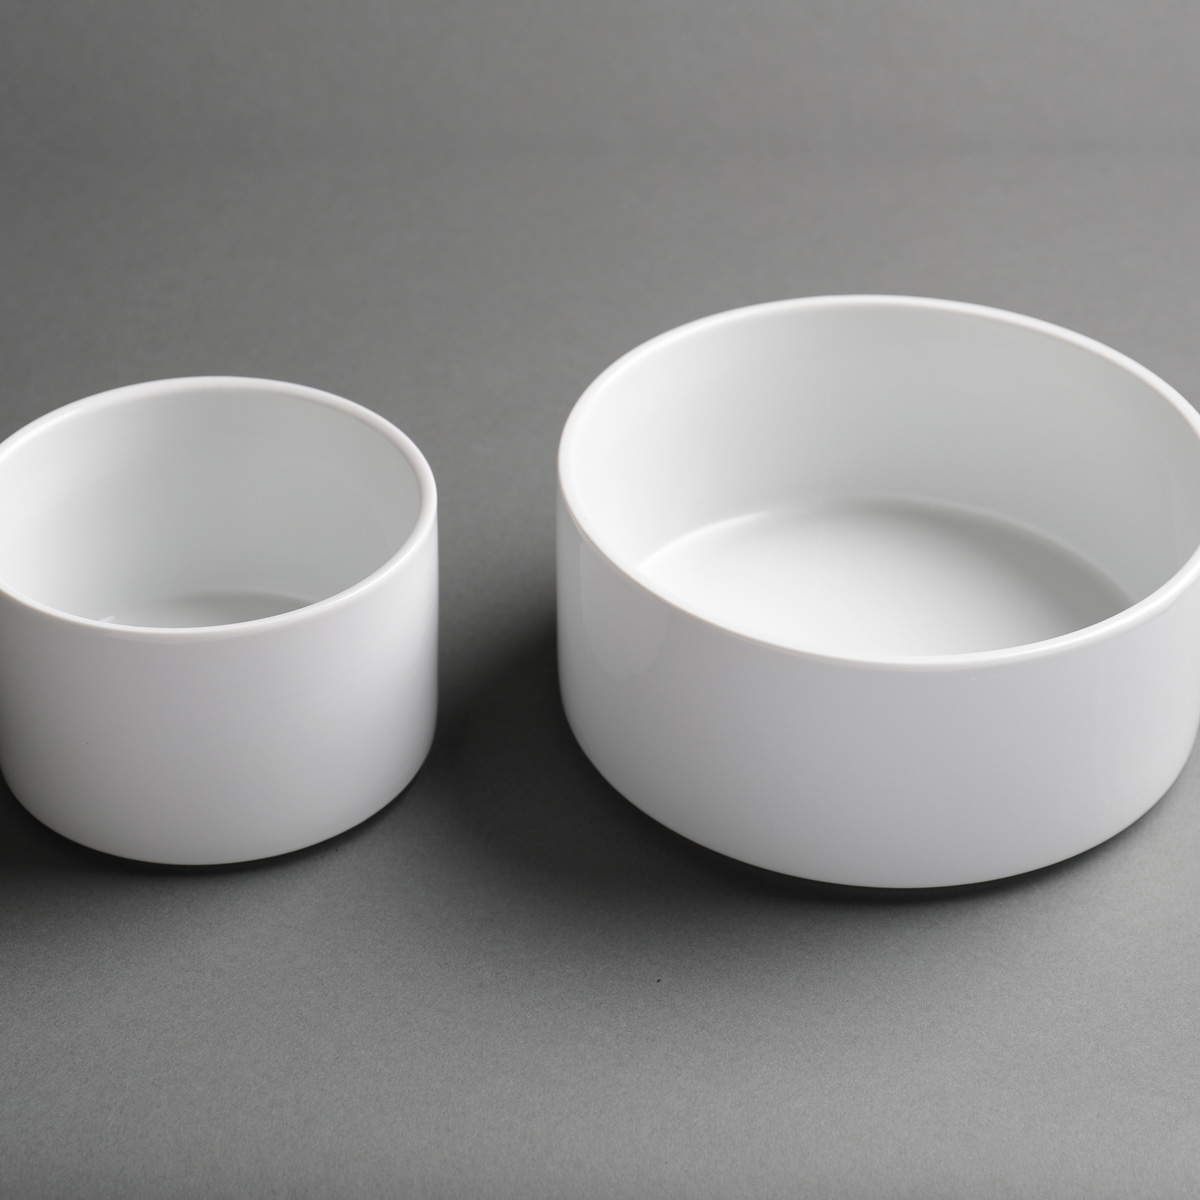 modern style serving bowls for catering events